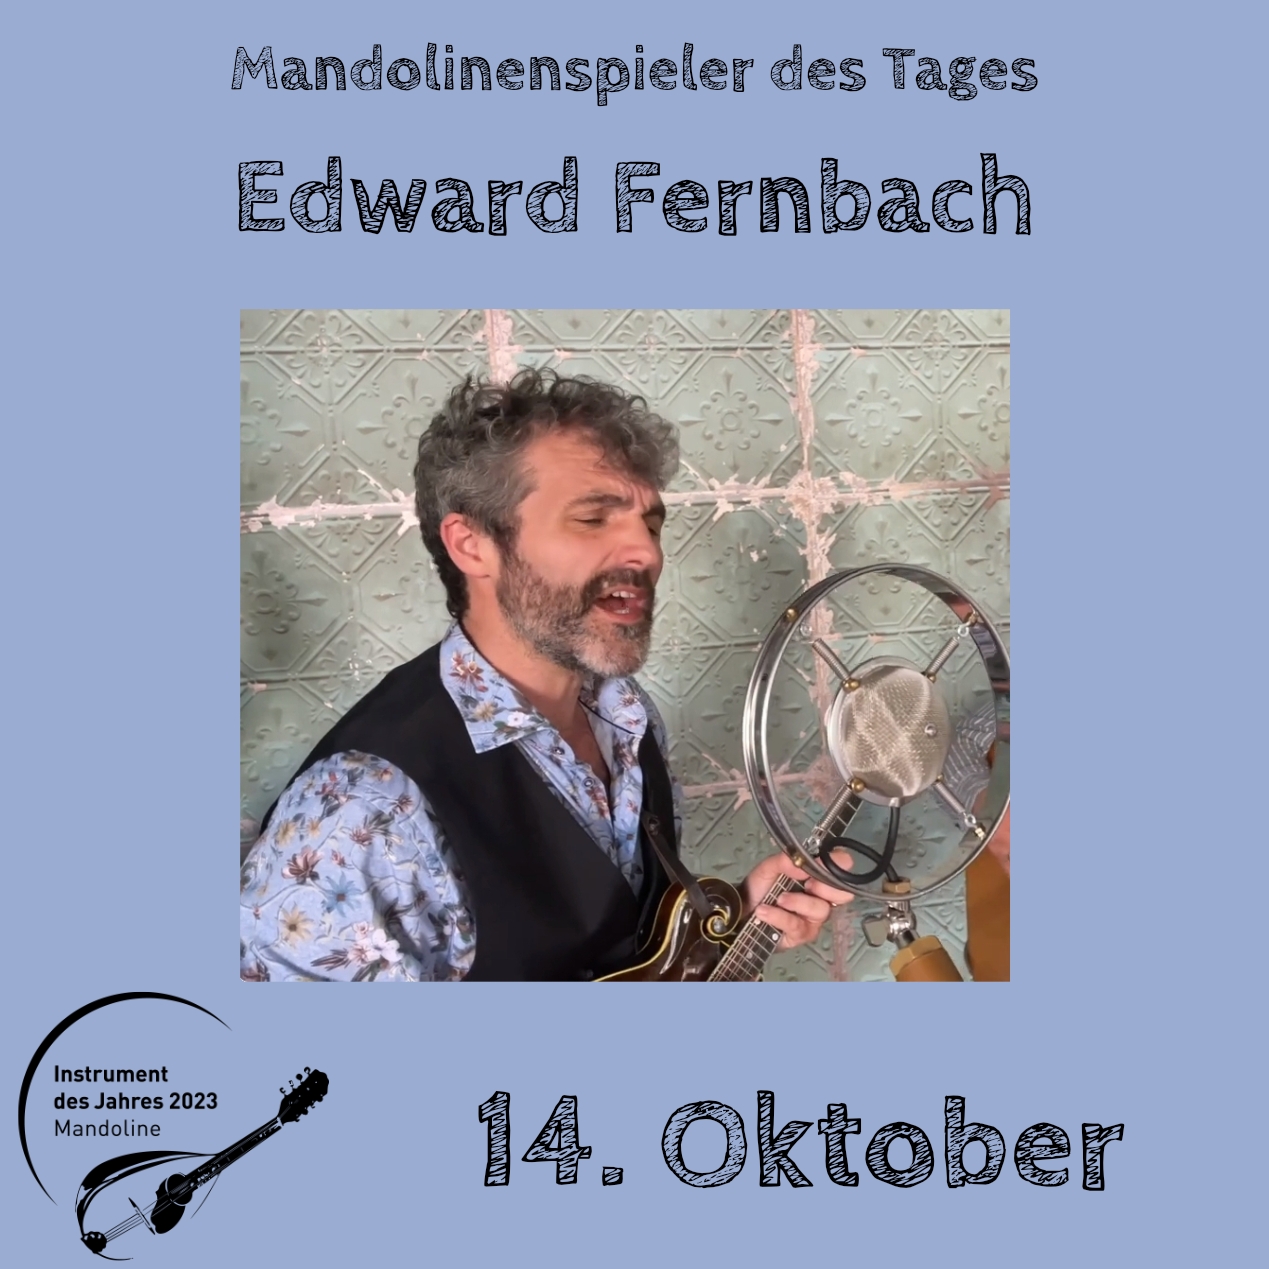 You are currently viewing 14. Oktober – Edward Fernbach